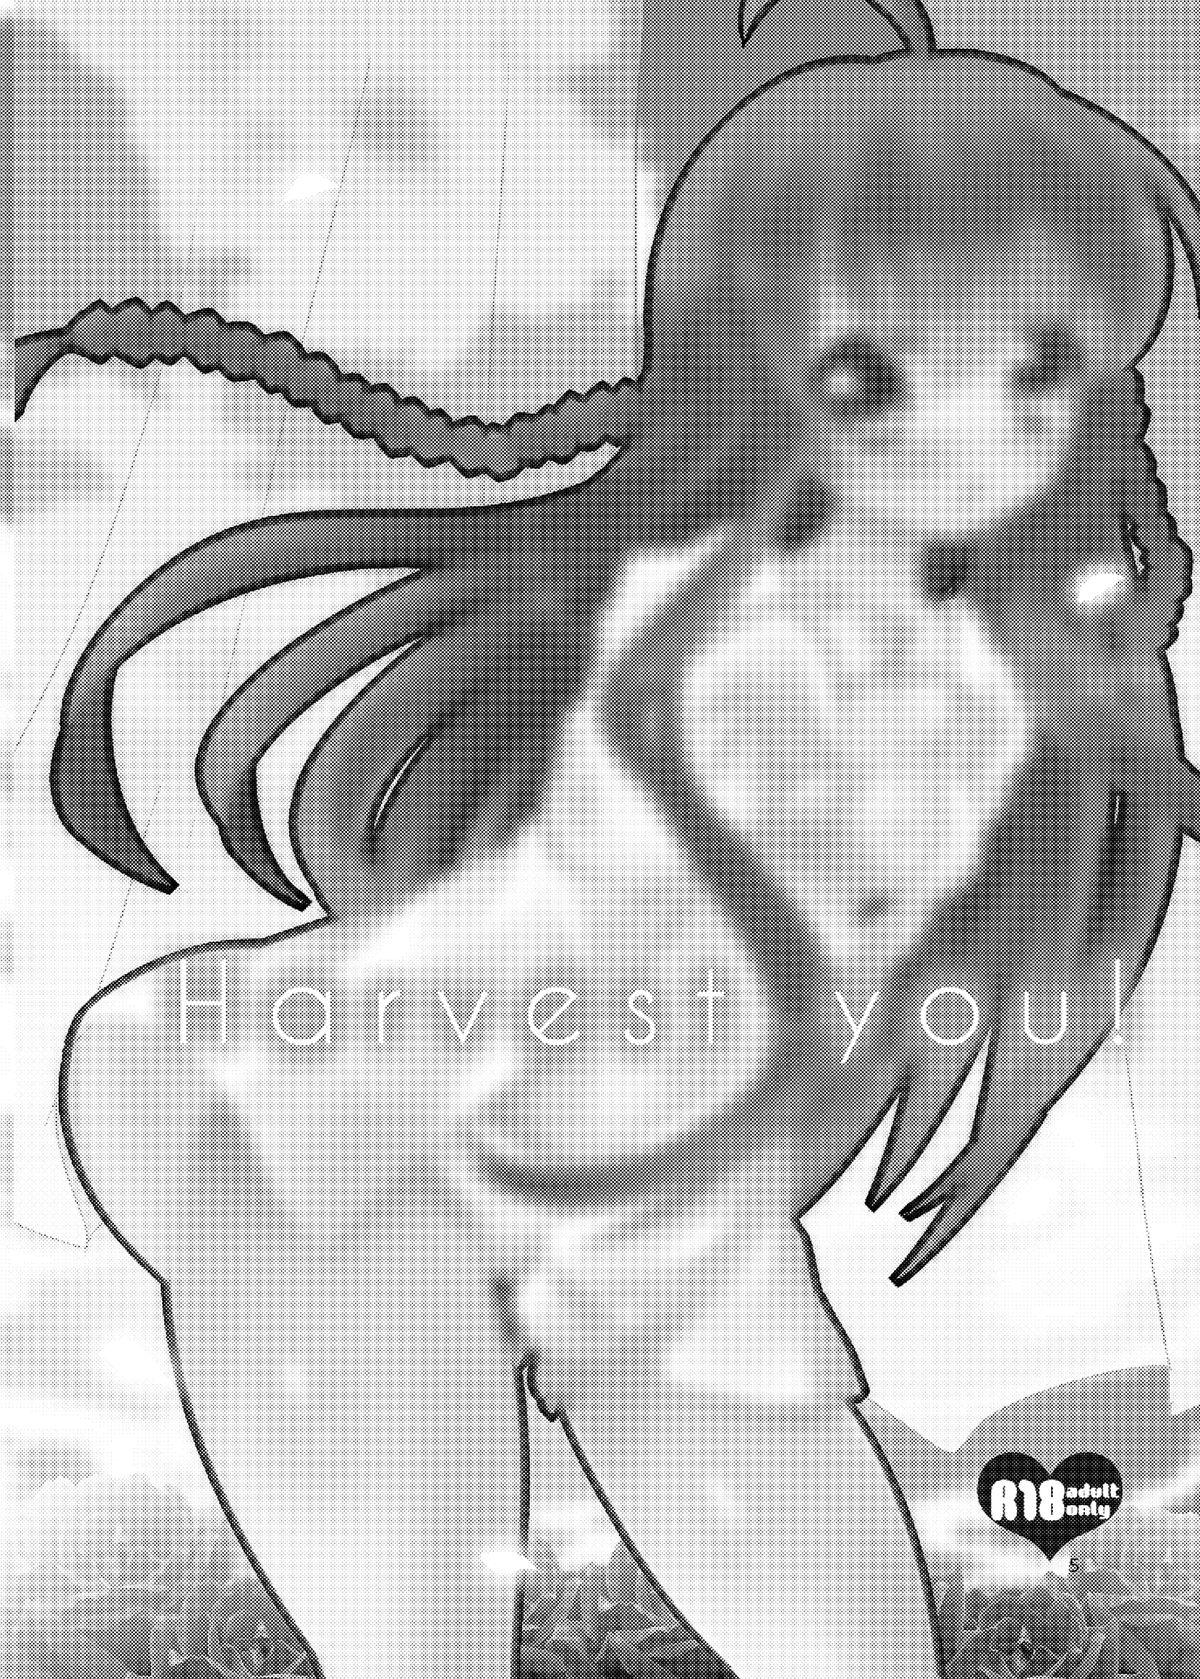 Esposa Harvest you! - Rewrite Livecams - Page 4